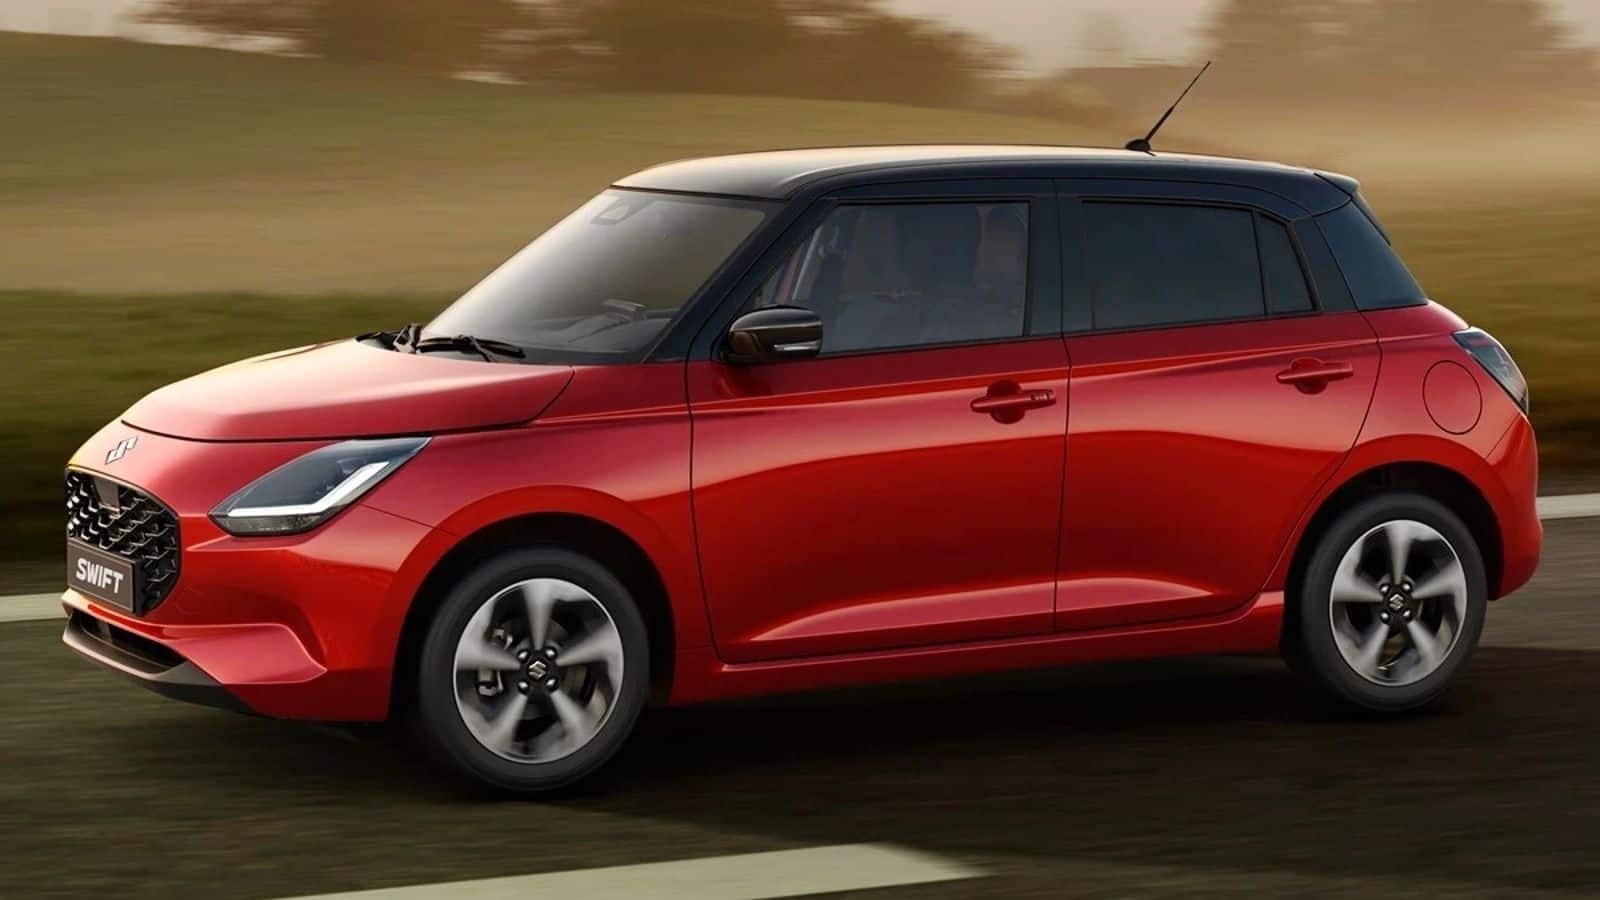 Maruti Swift to offer 6 airbags, new Z Series engine